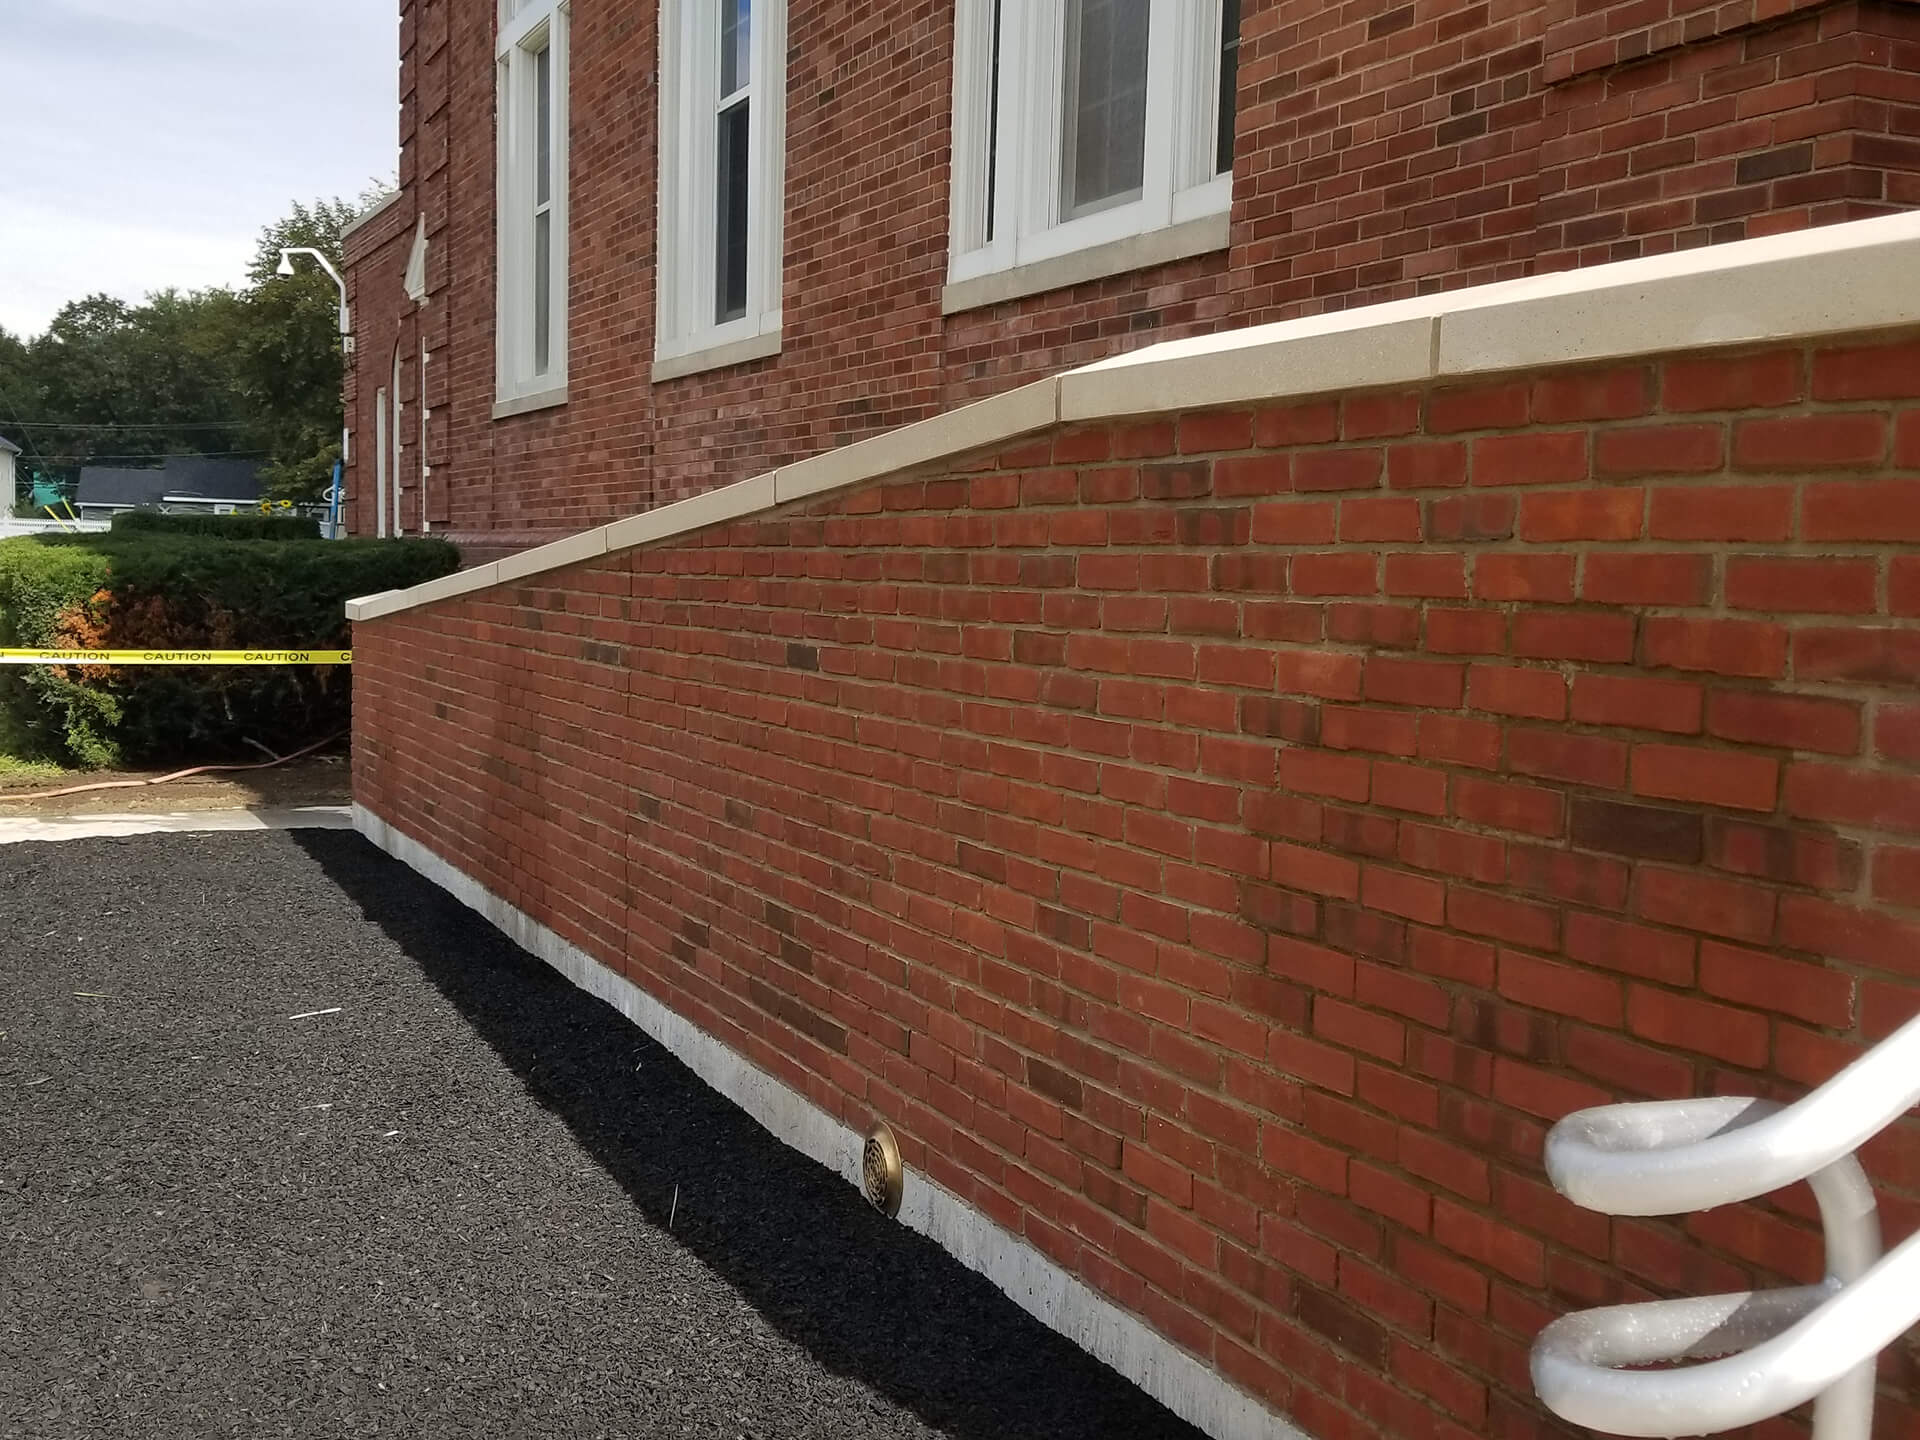 Brick building with sloped entry ramp